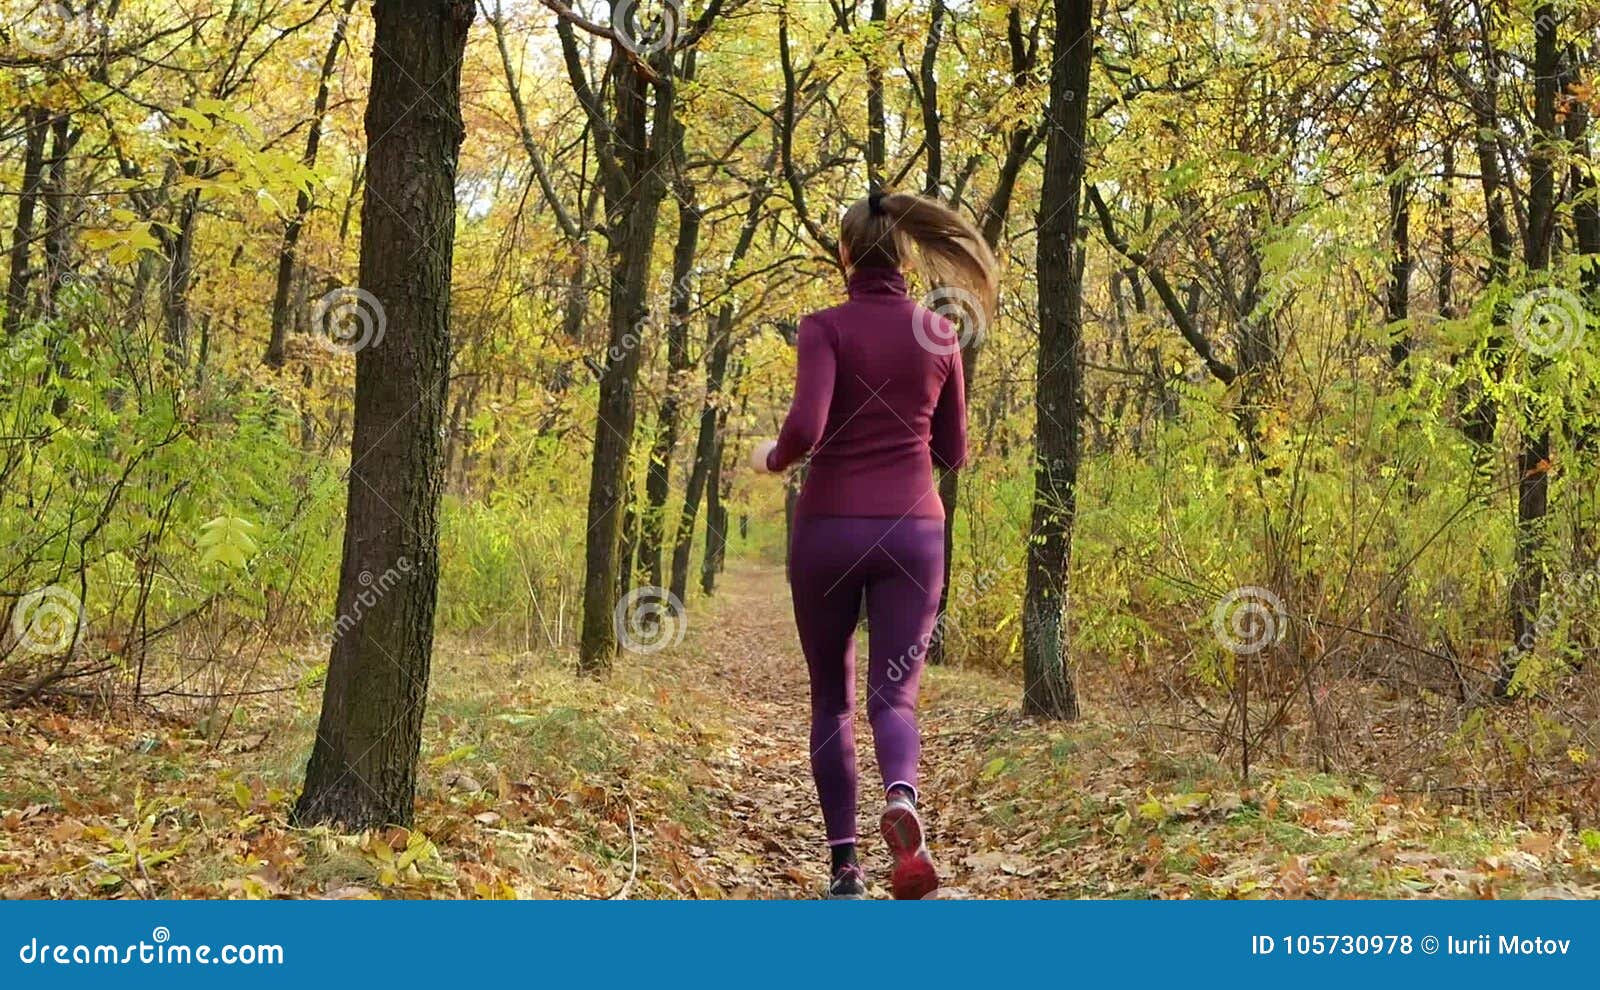 Slow Motion Running - Woman Runner Jogging on Autumn Forest Path. Fit ...